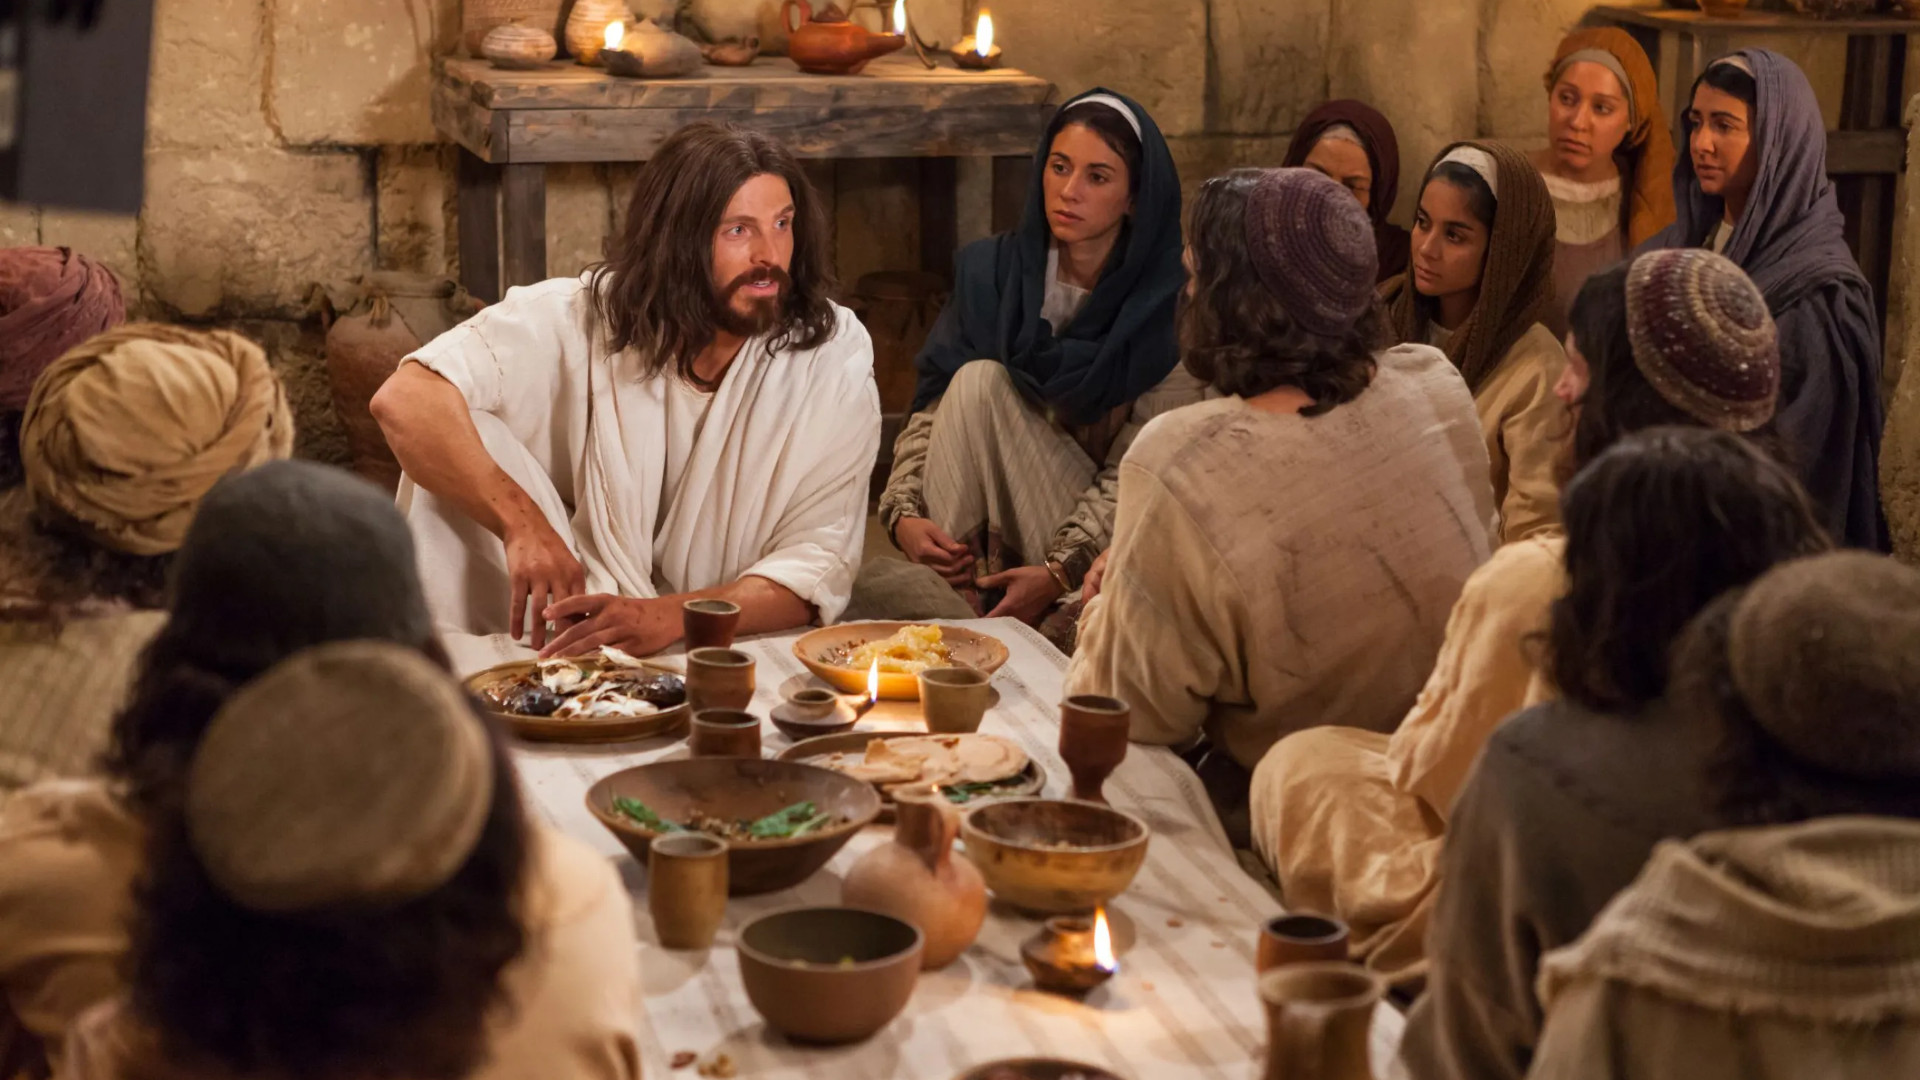 Jesus Christ sits at a meal with his apostles and followers after his resurrection in this image from the Bible Videos published by The Church of Jesus Christ of Latter-day Saints.